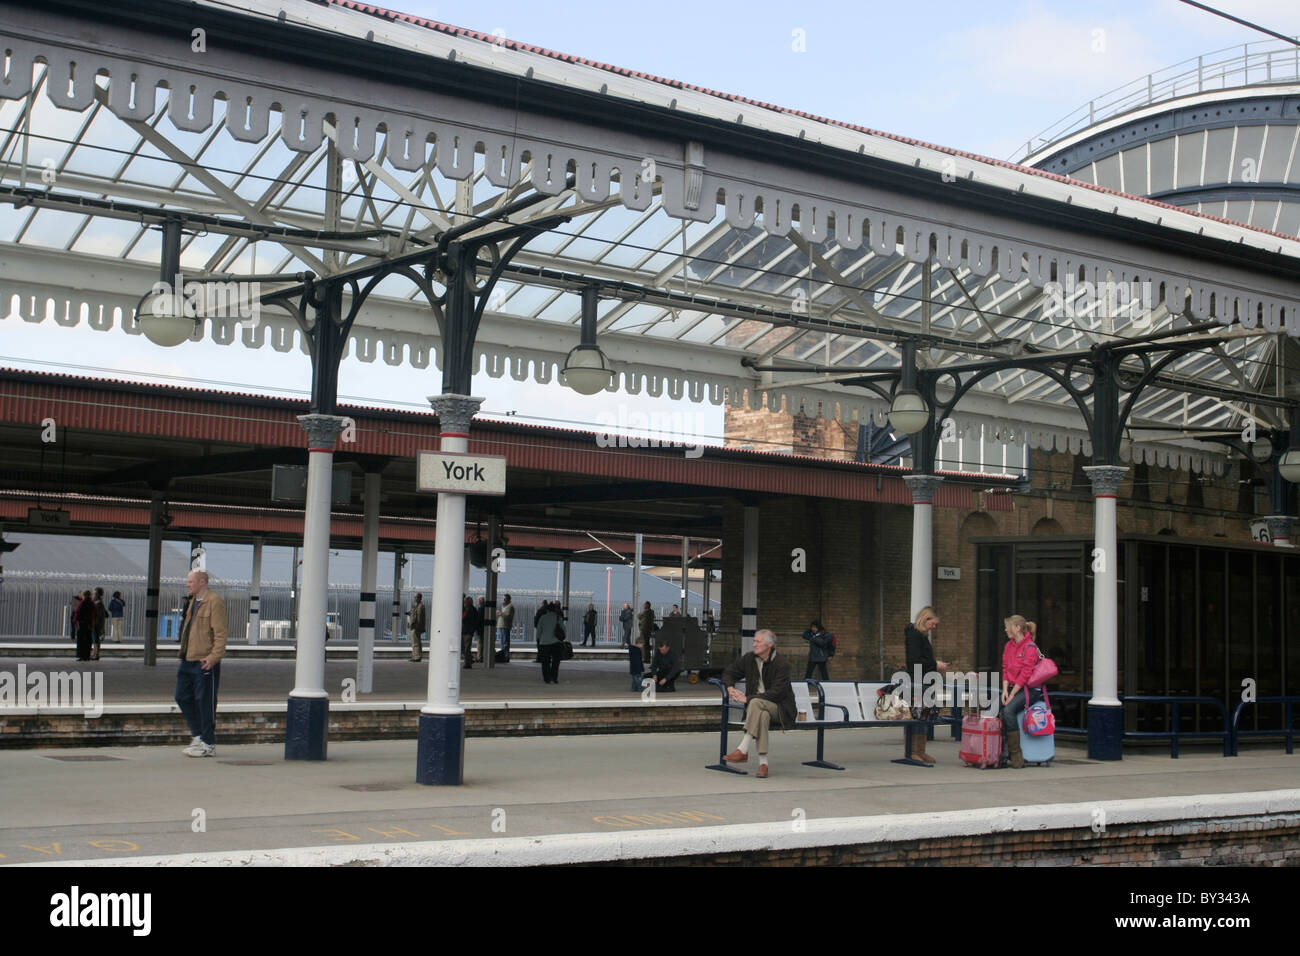 View of York railway station in UK from inside a train. Stock Photo